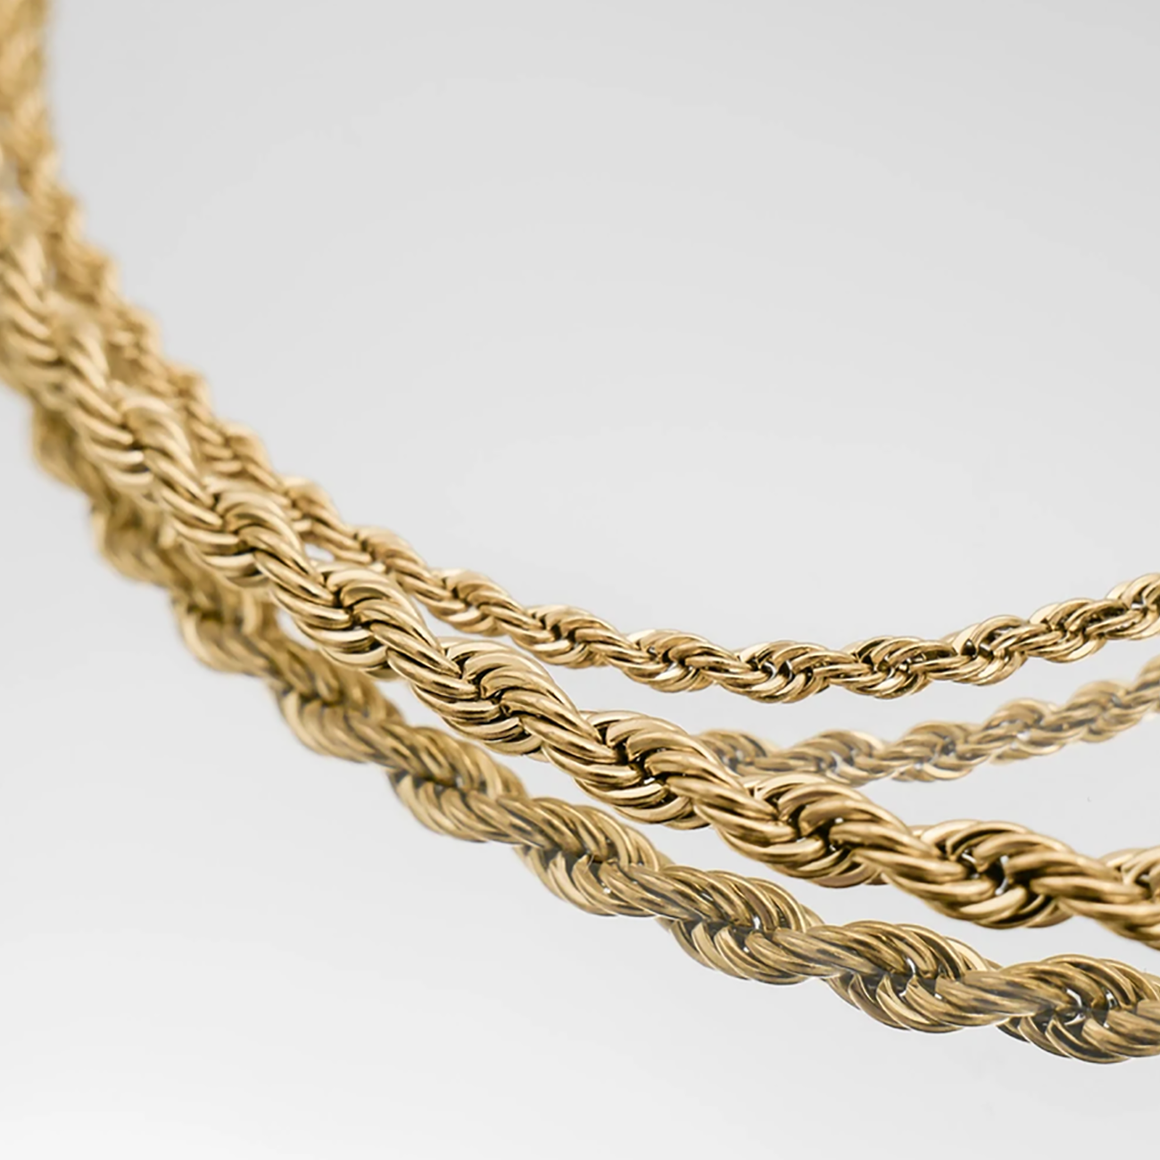 54 FLORAL 3mm SNAKE ROPE NECKLACE CHAIN - GOLD